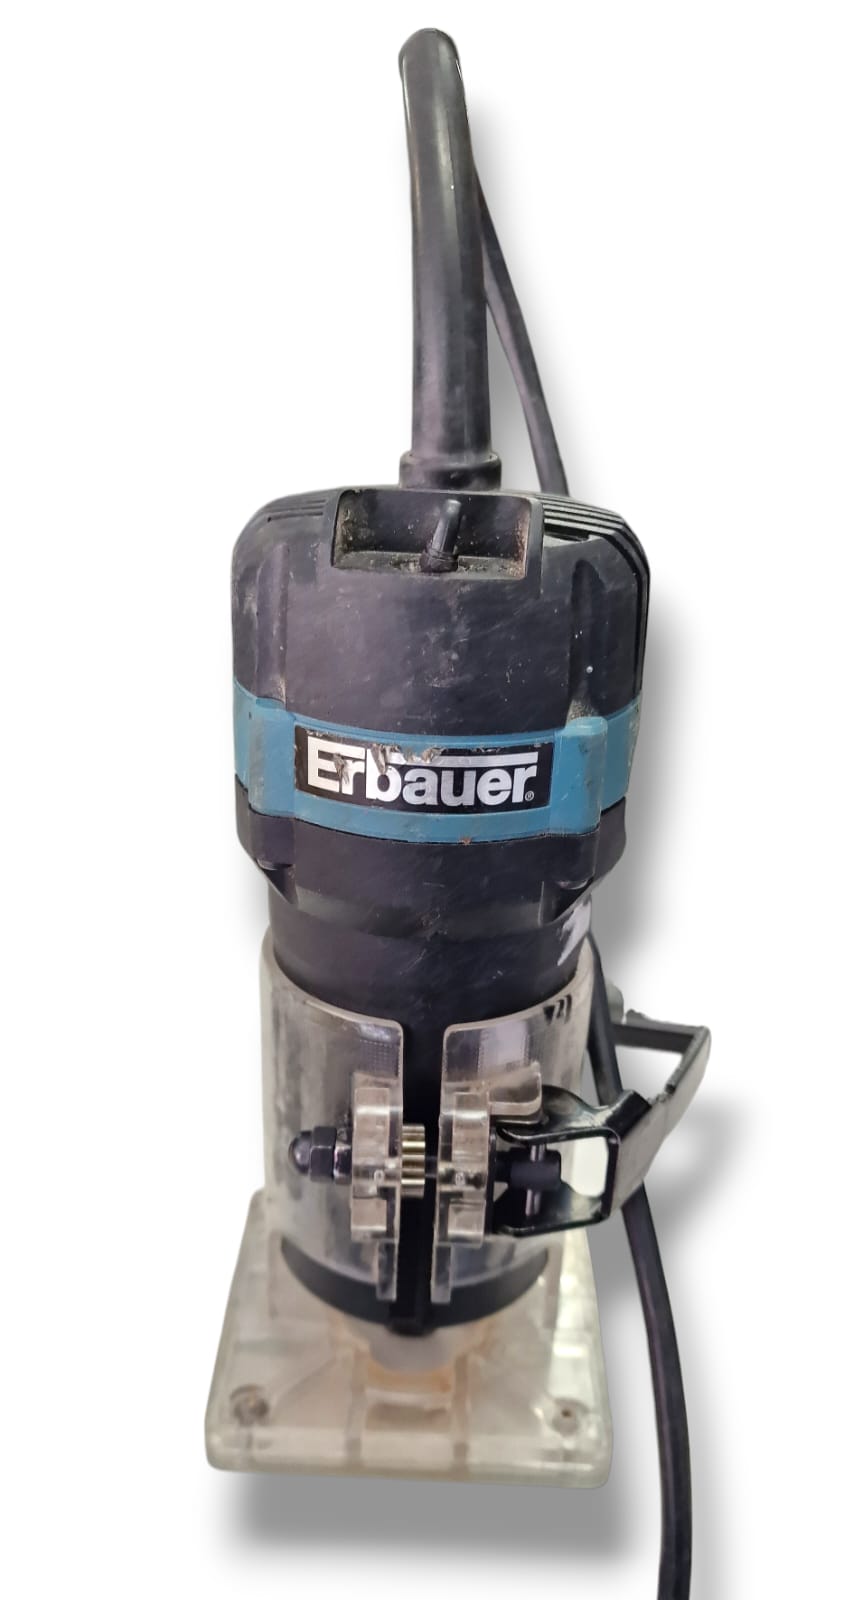 Erbauer power palm router